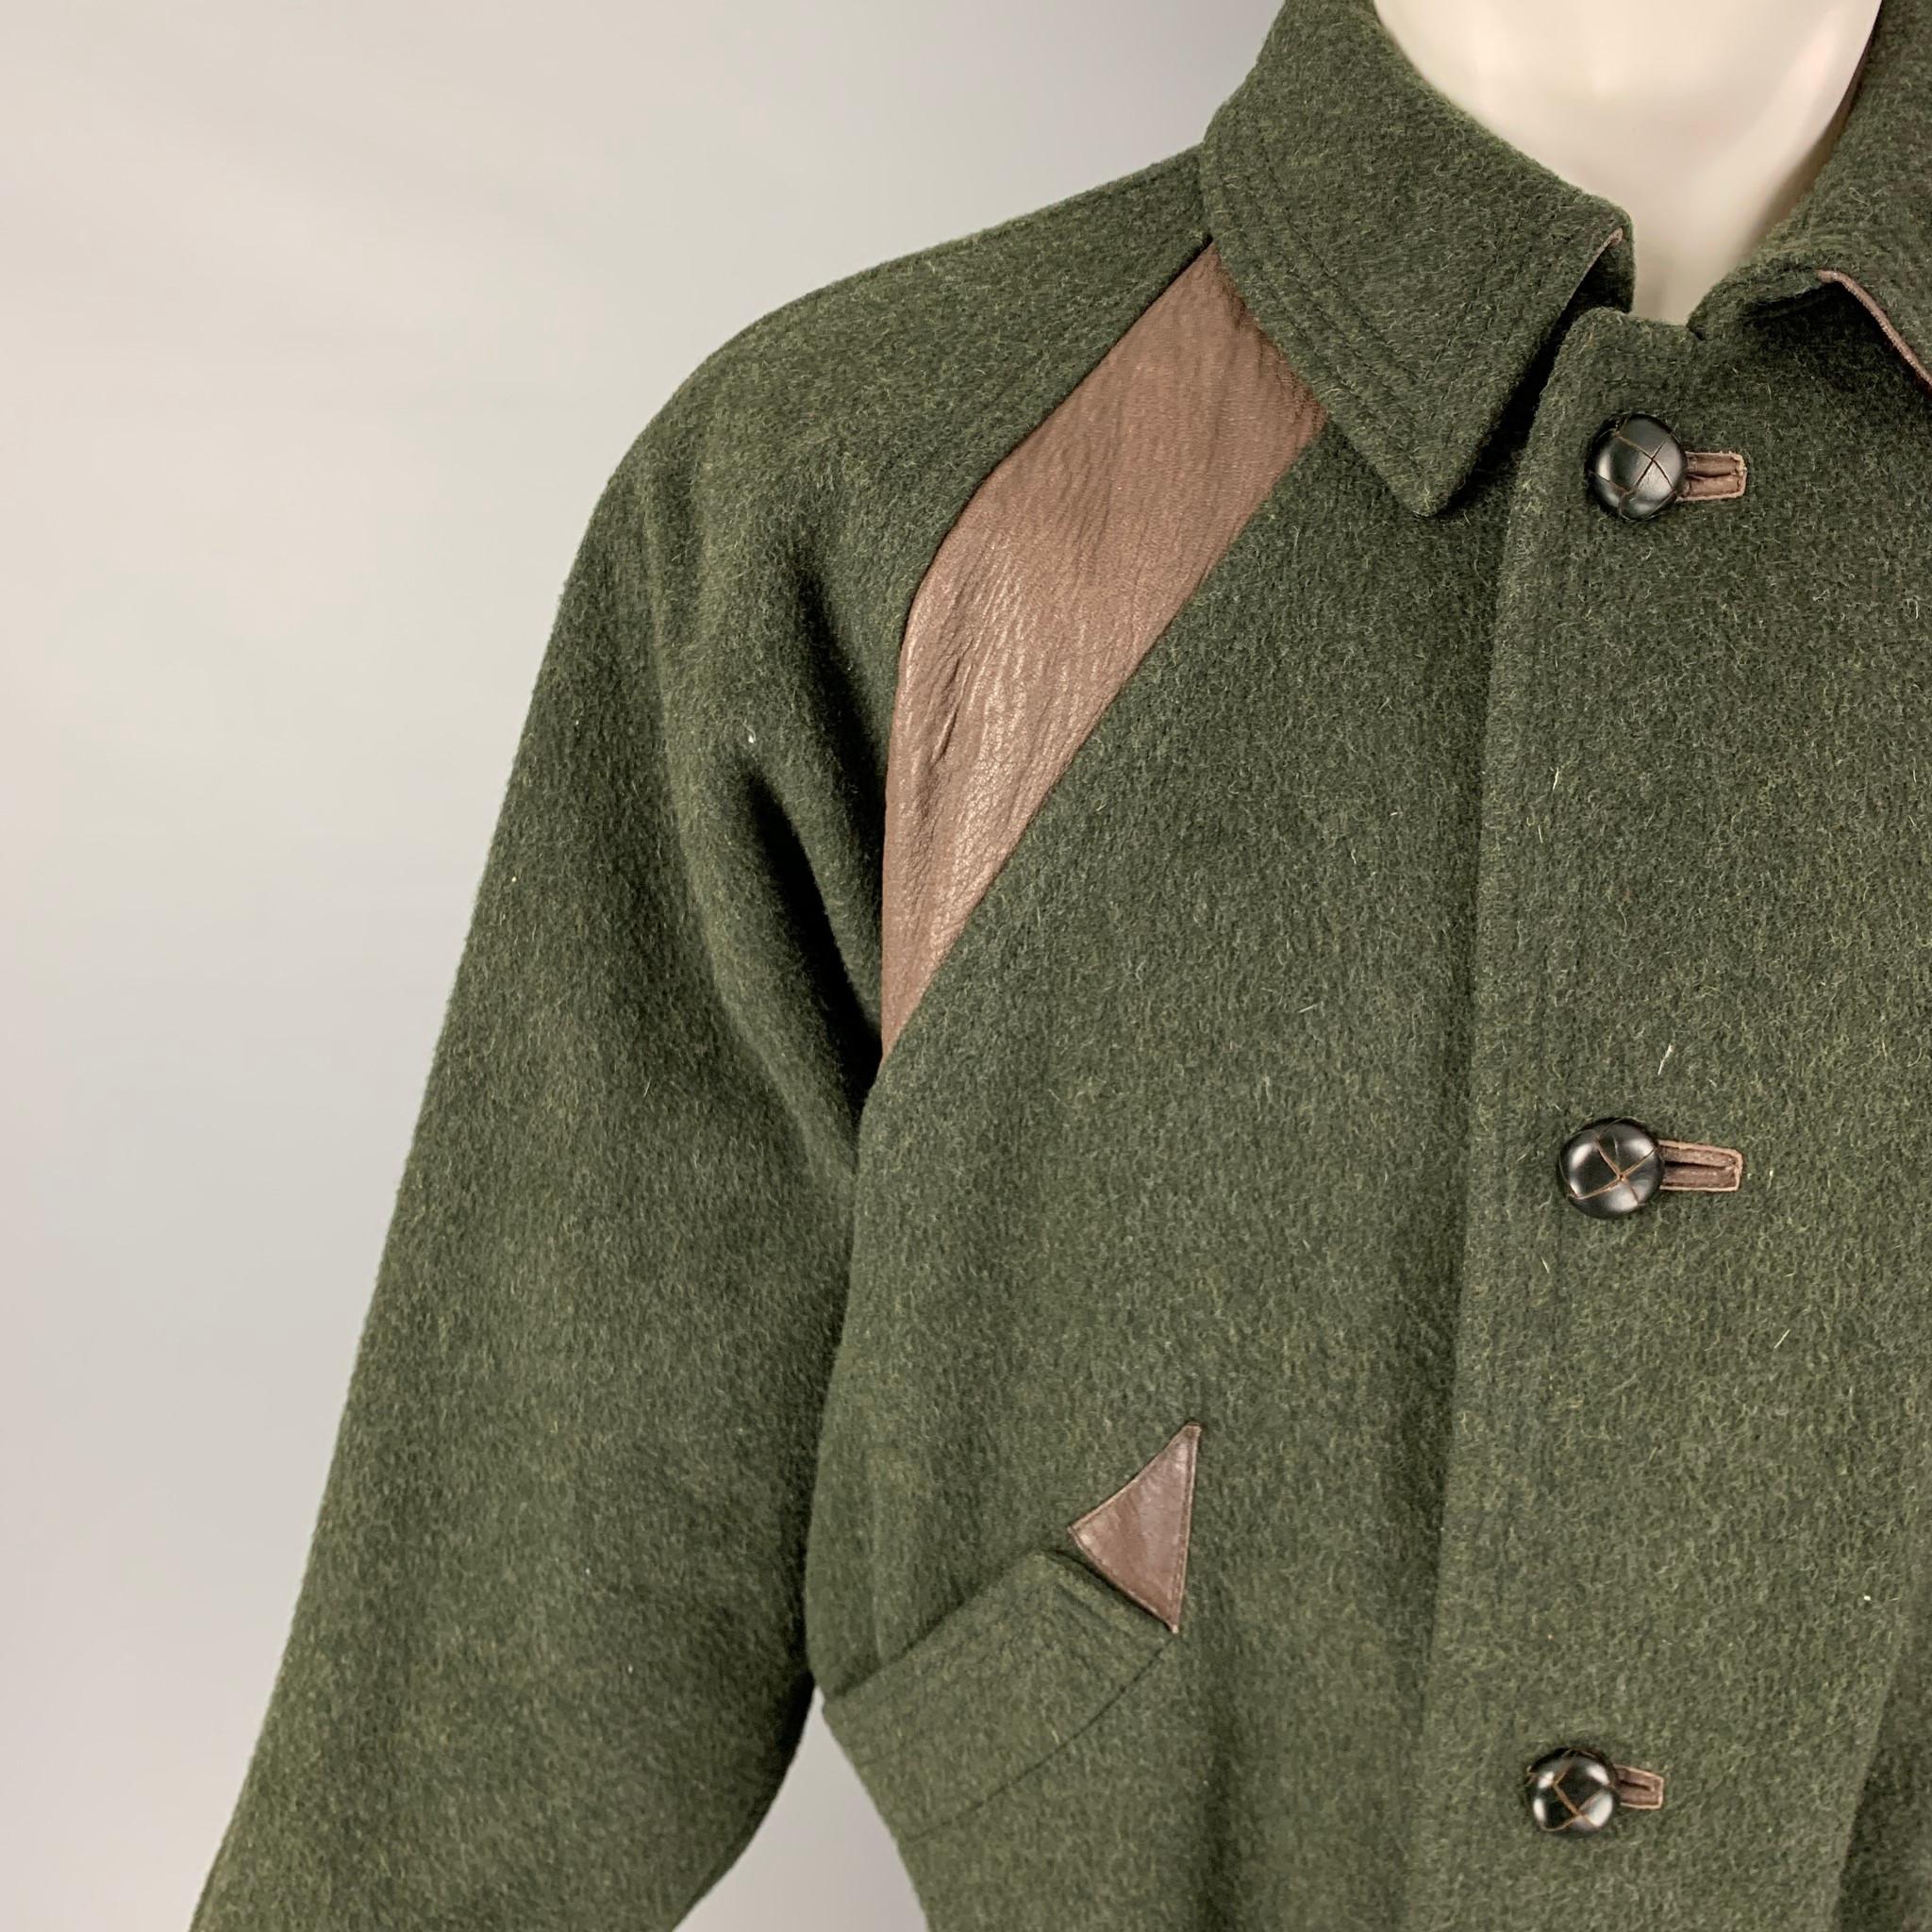 VINTAGE Gucci jacket comes in a forest green wool featuring a loose fit, brown leather trim details, ribbed hem, slit pockets, shoulder pads, spread collar, and a black woven button closure. Made in Italy. 

Good Pre-Owned Condition. Light wear